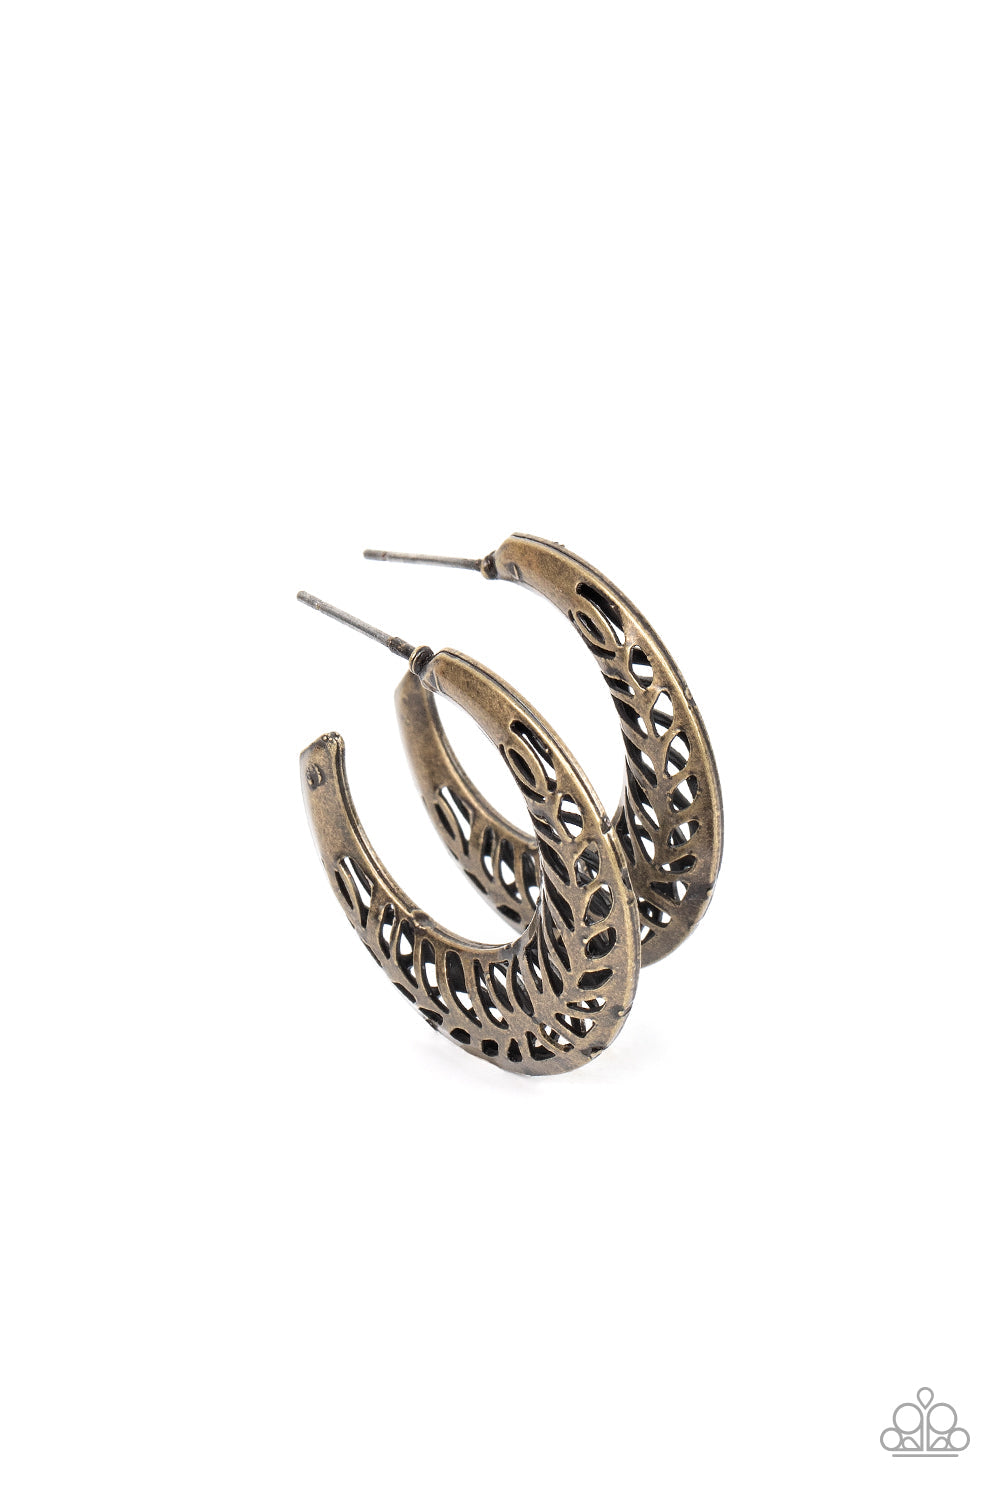 Wanderlust Wilderness - Brass Hoop Earrings - Paparazzi Accessories - Airy leafy cutouts climb two curved brass frames that join into a rustic hoop, resulting in a seasonal shimmer. Earring attaches to a standard post fitting. Hoop measures approximately 1 1/4" in diameter.